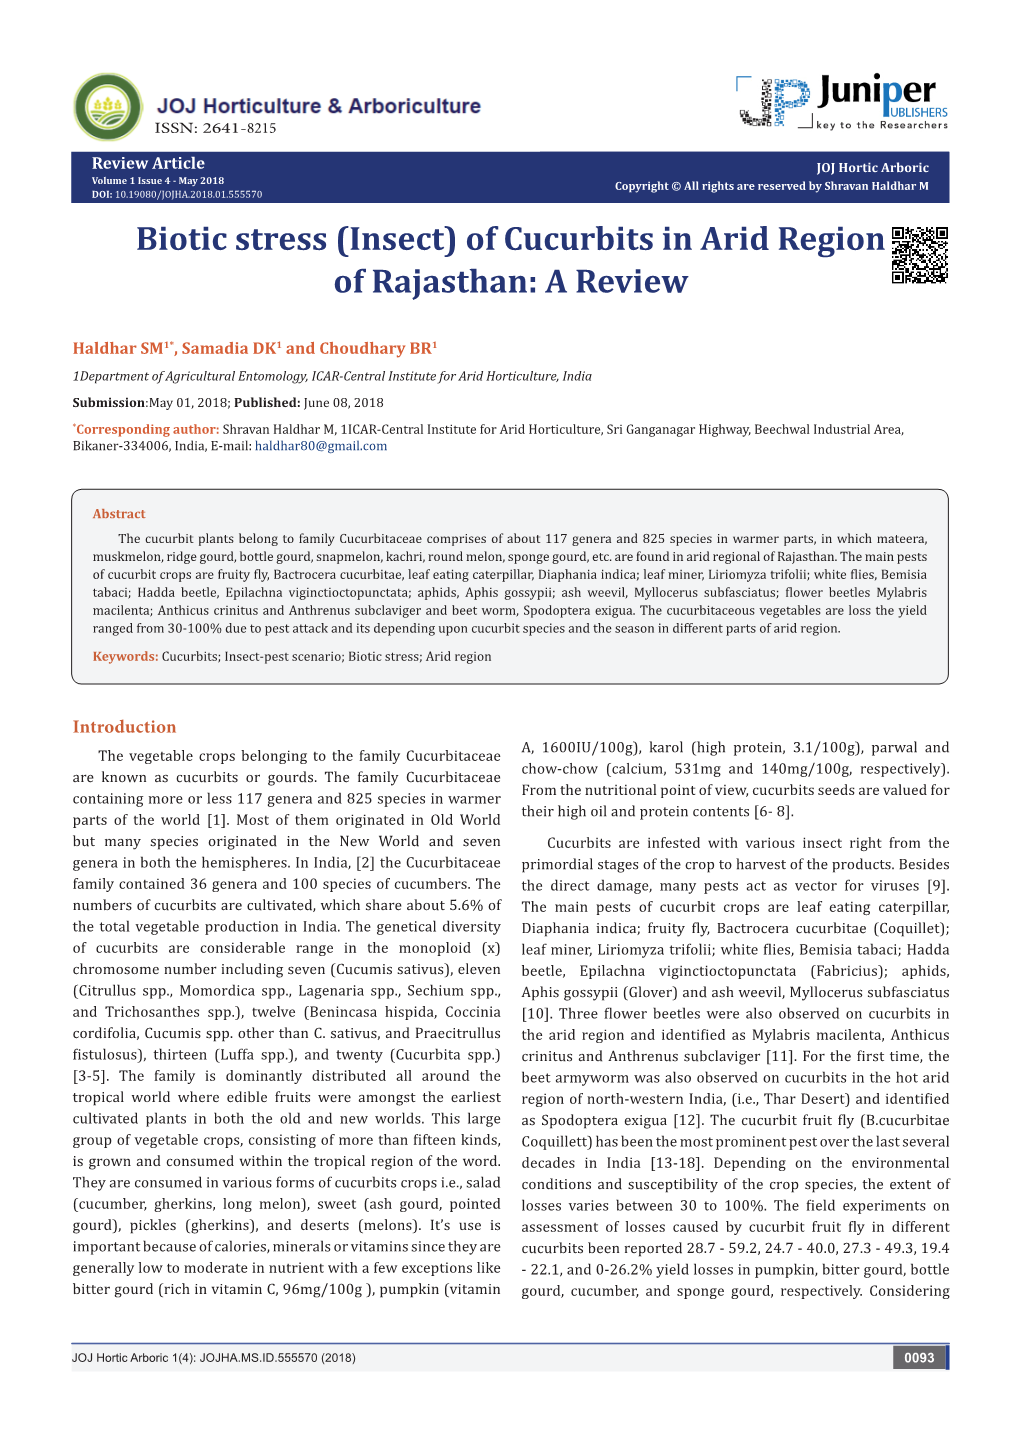 Biotic Stress (Insect) of Cucurbits in Arid Region of Rajasthan: a Review